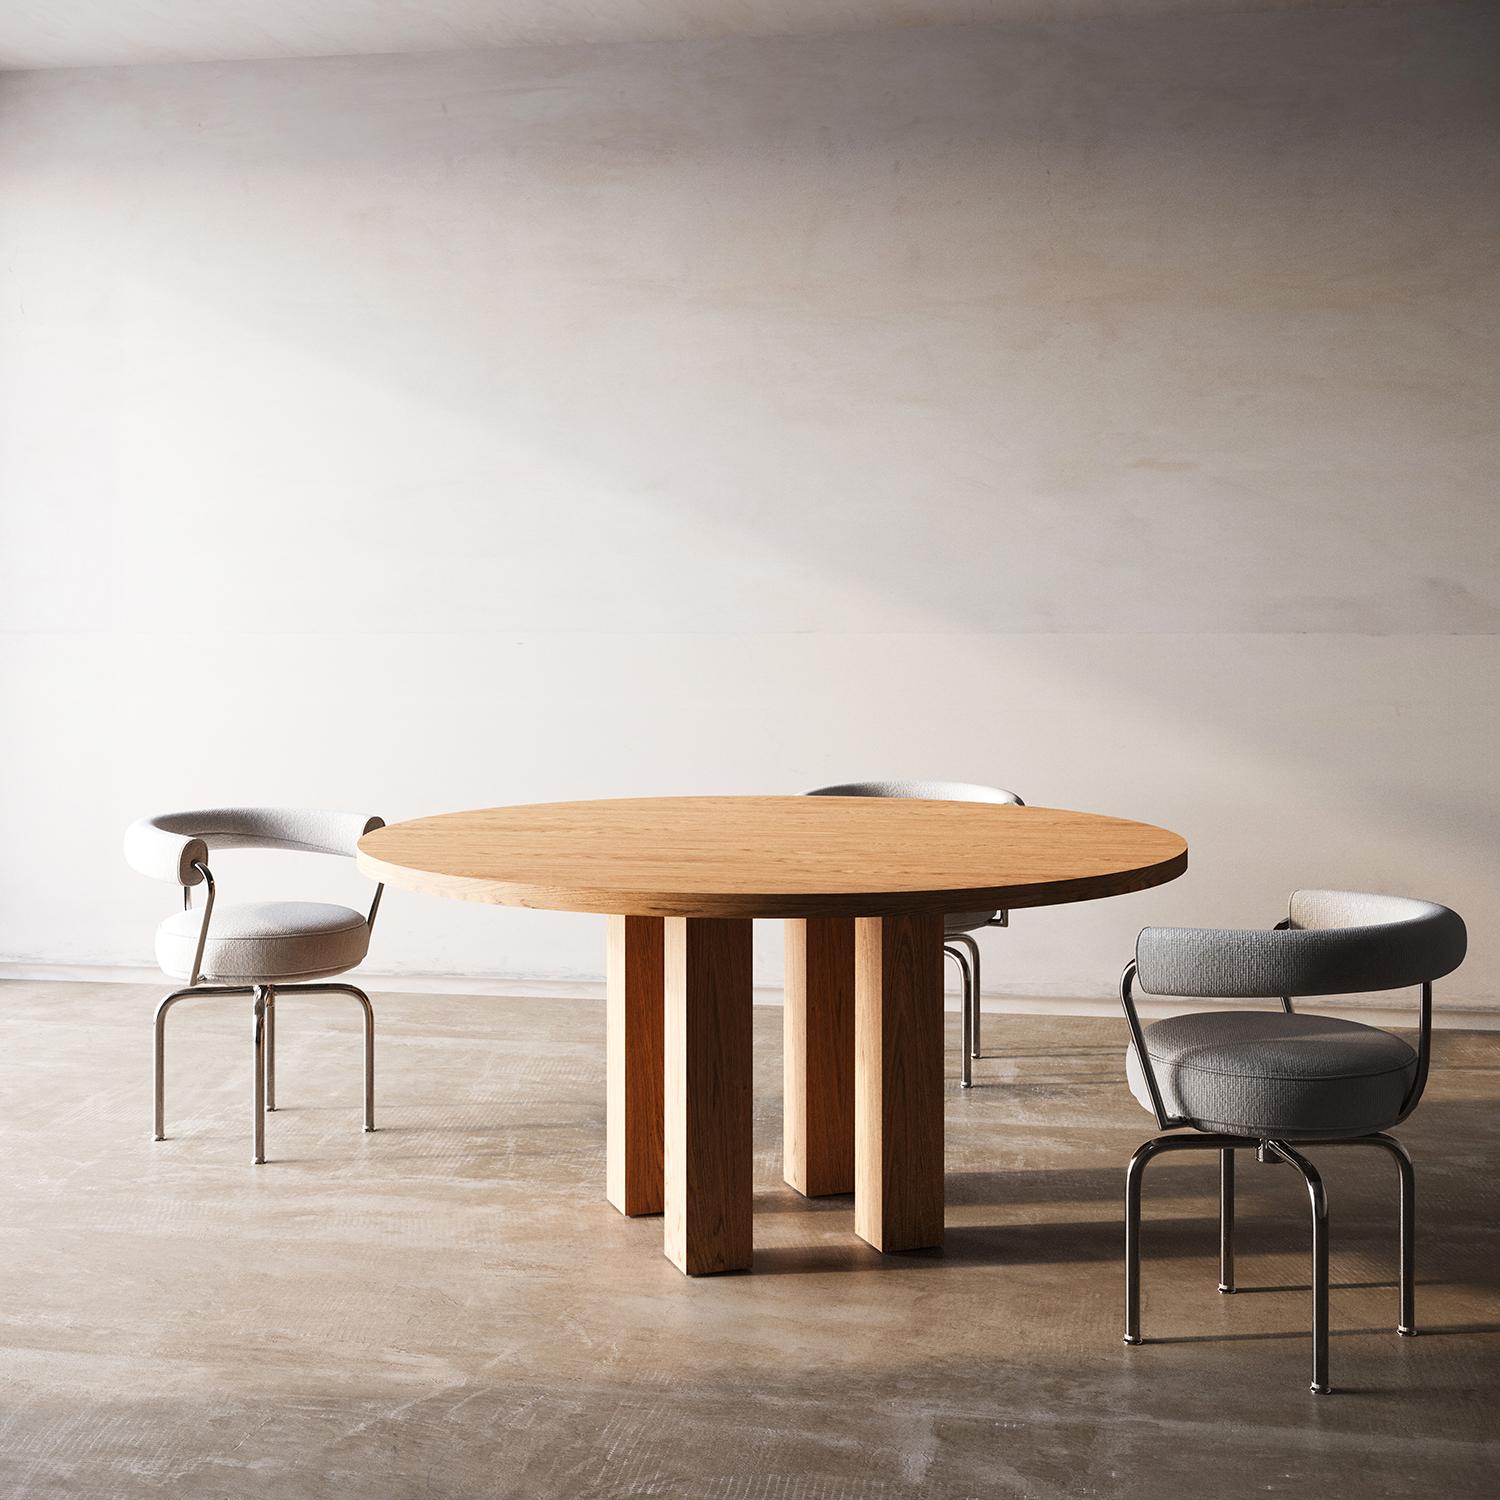 This piece quietly challenges the archetype of a table with the unexpected proportion of the legs and hidden detailing. A single plane effortlessly floats atop four oversized wood legs.

Beautifully crafted with high grade solid wood and handmade